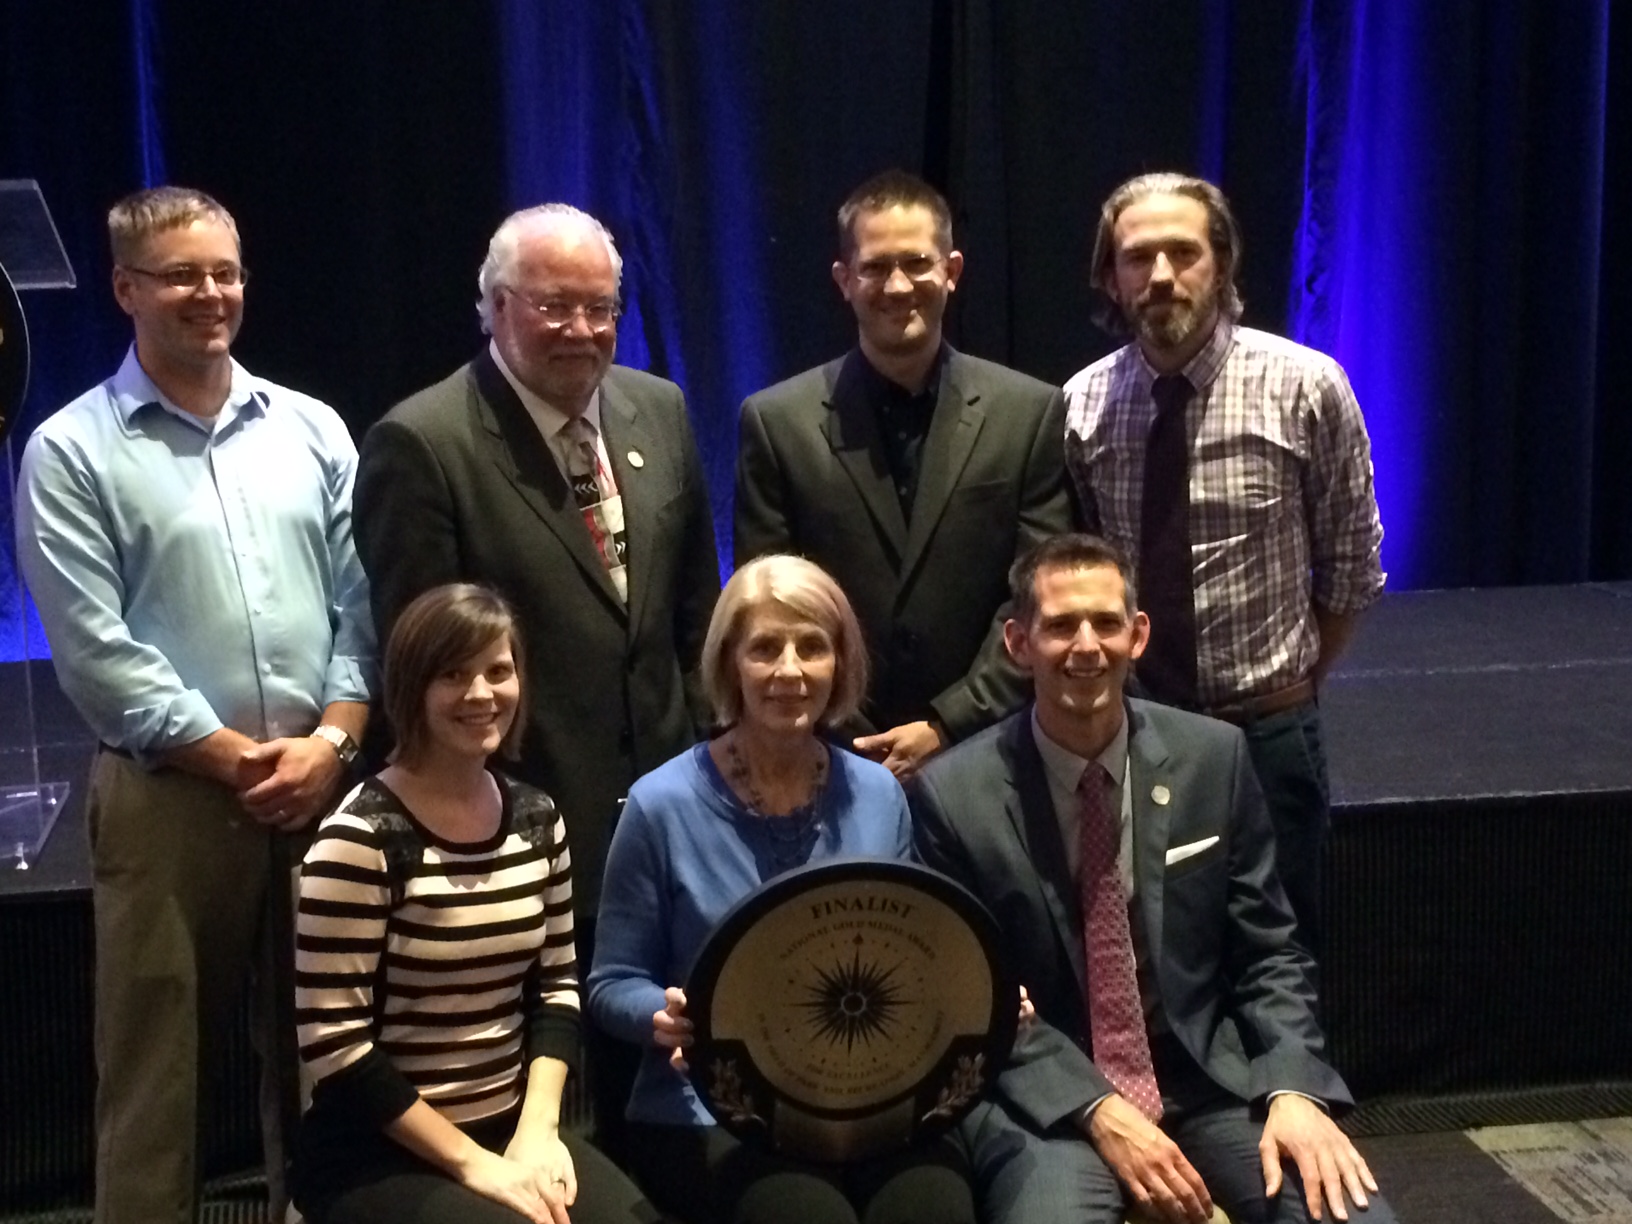 Senior staff members of the Carmel Clay Parks & Recreation department hold their gold medal. The group was in North Carolina this week to attend the 2014 National Recreation and Park Association Congress. Pictured here are (back row, left to right) Ben Johnson, Mark Westermeier, Kurtis Baumgartner, Eric Mehl, (front row, left to right) Lindsay Labas, Audrey Kostrzewa, and Michael Klitzing. (Submitted photo) 